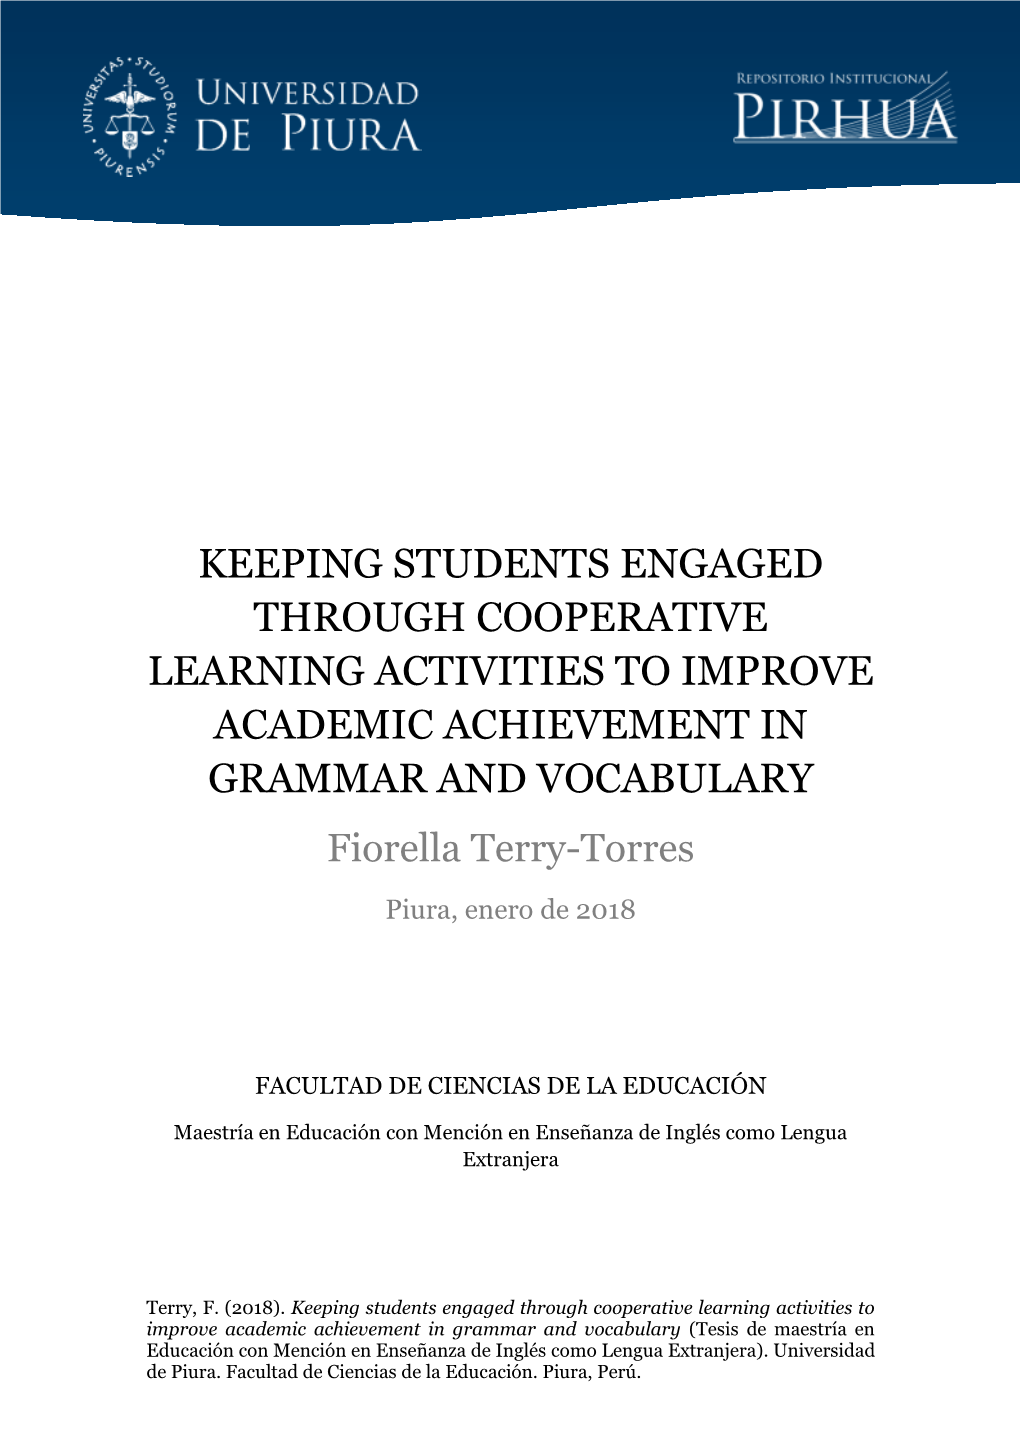 KEEPING STUDENTS ENGAGED THROUGH COOPERATIVE LEARNING ACTIVITIES to IMPROVE ACADEMIC ACHIEVEMENT in GRAMMAR and VOCABULARY Fiorella Terry-Torres